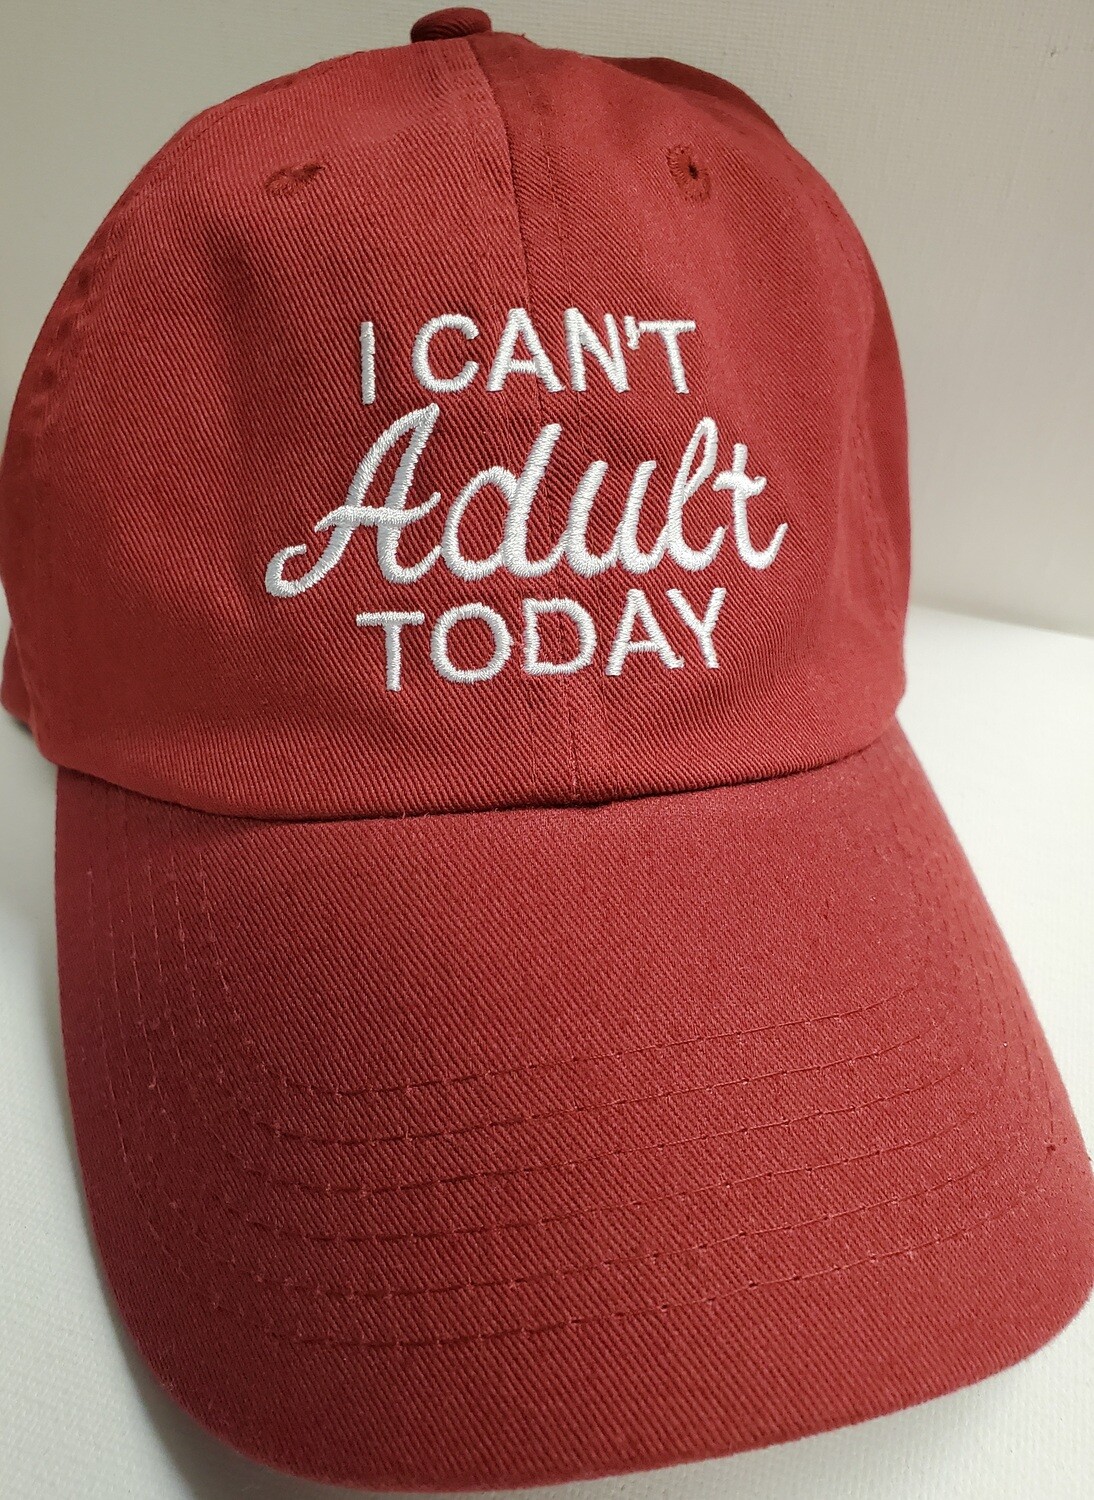 I CAN'T ADULT TODAY, EMBROIDERED CAP